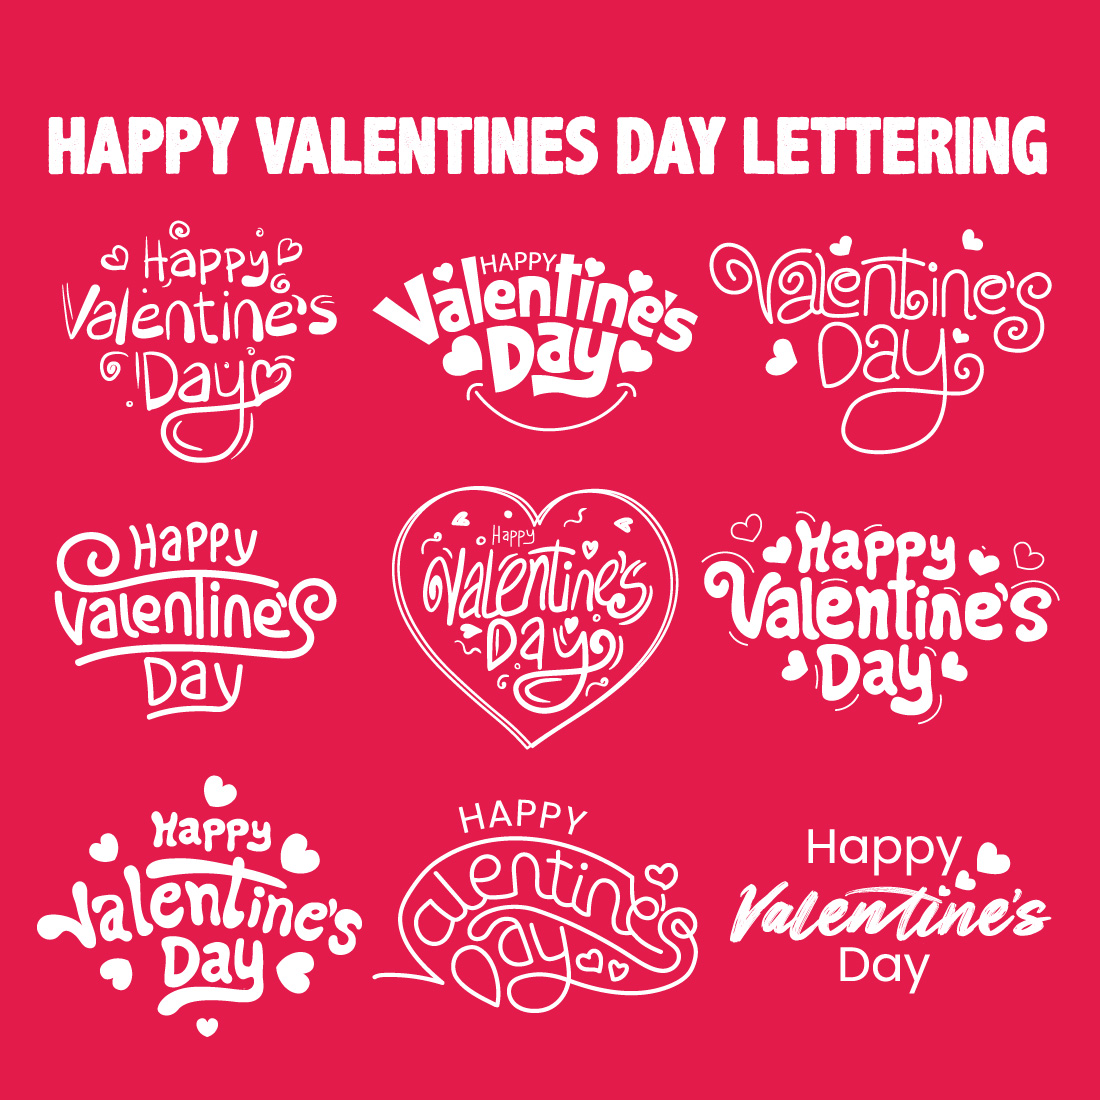 Happy valentines day greeting card diamond heart Vector Image